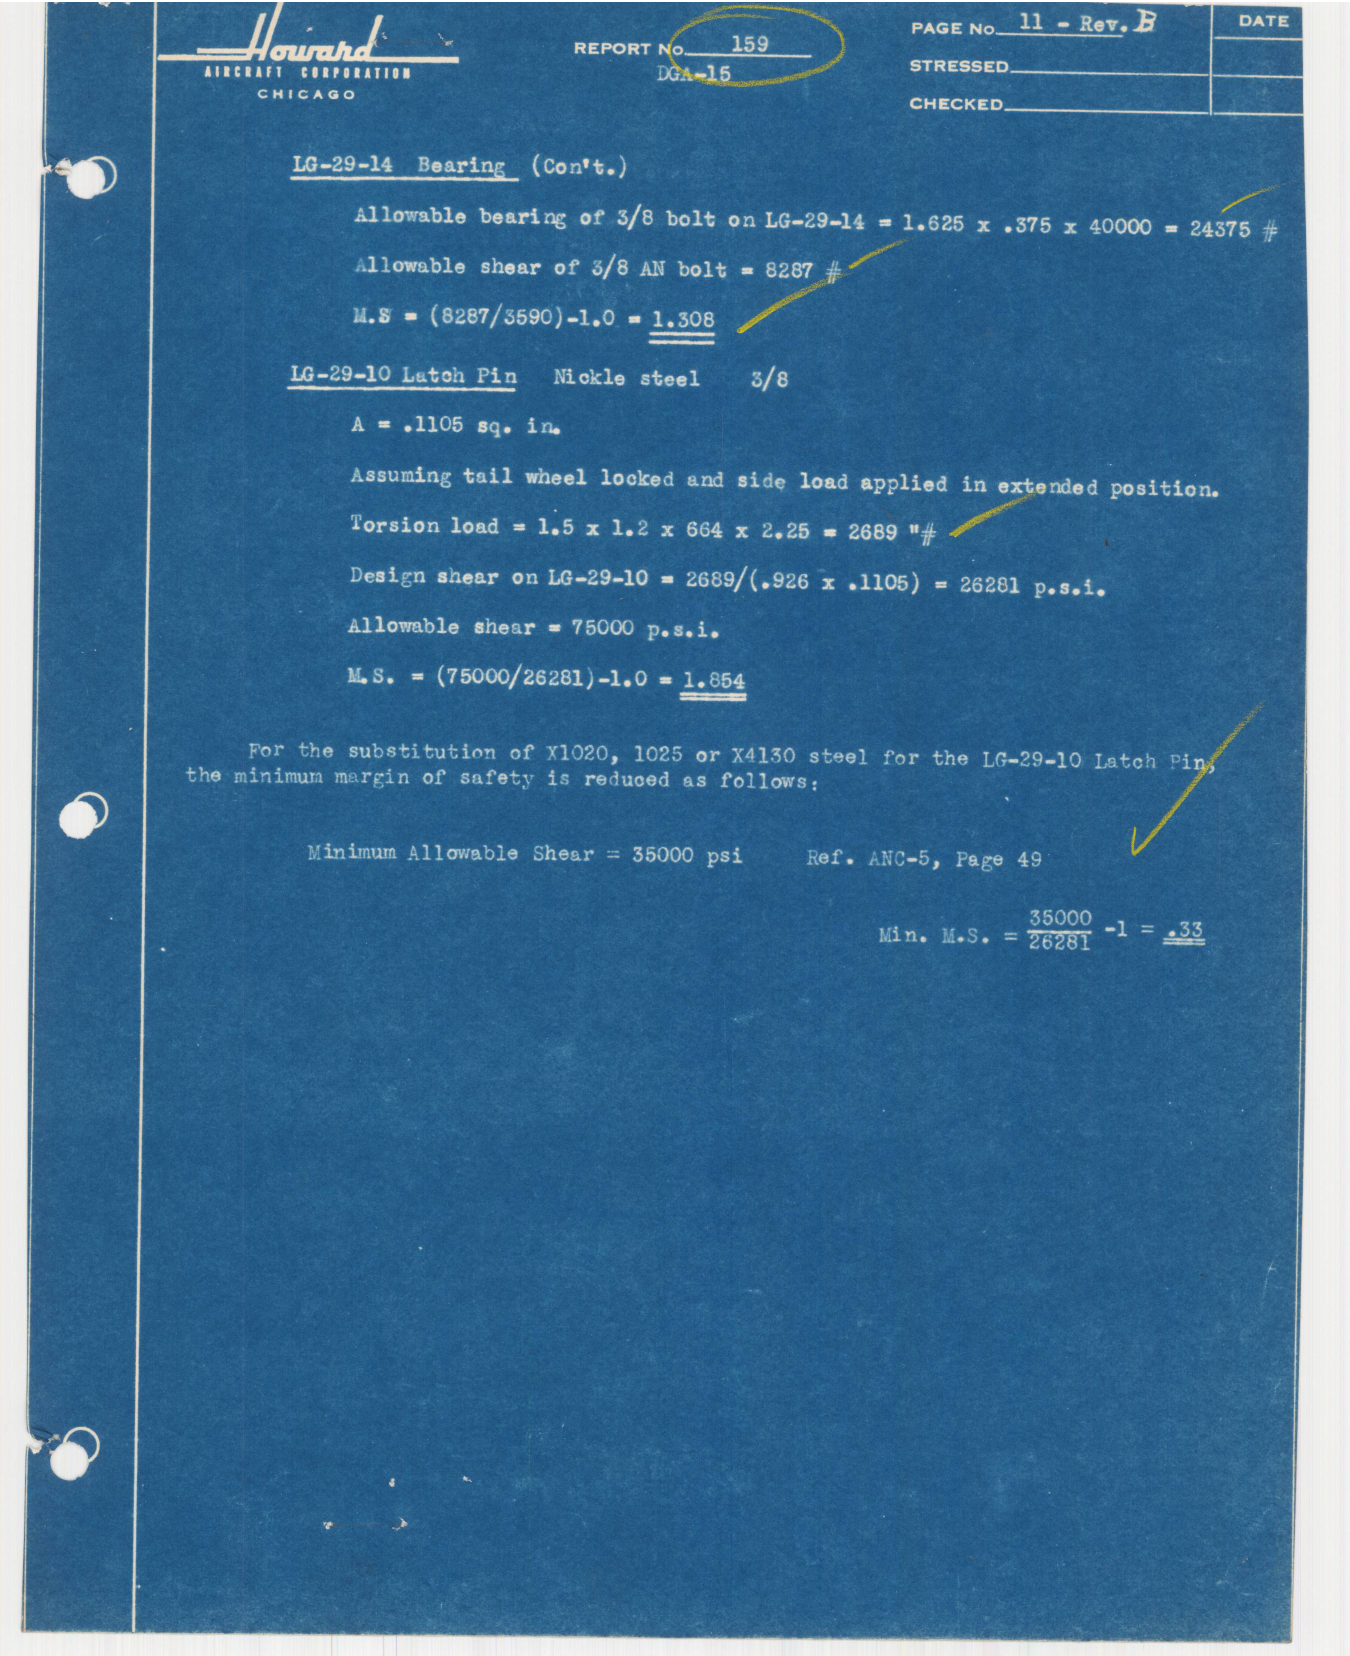 Sample page 29 from AirCorps Library document: Report 159, Tailwheel Analysis , DGA-15